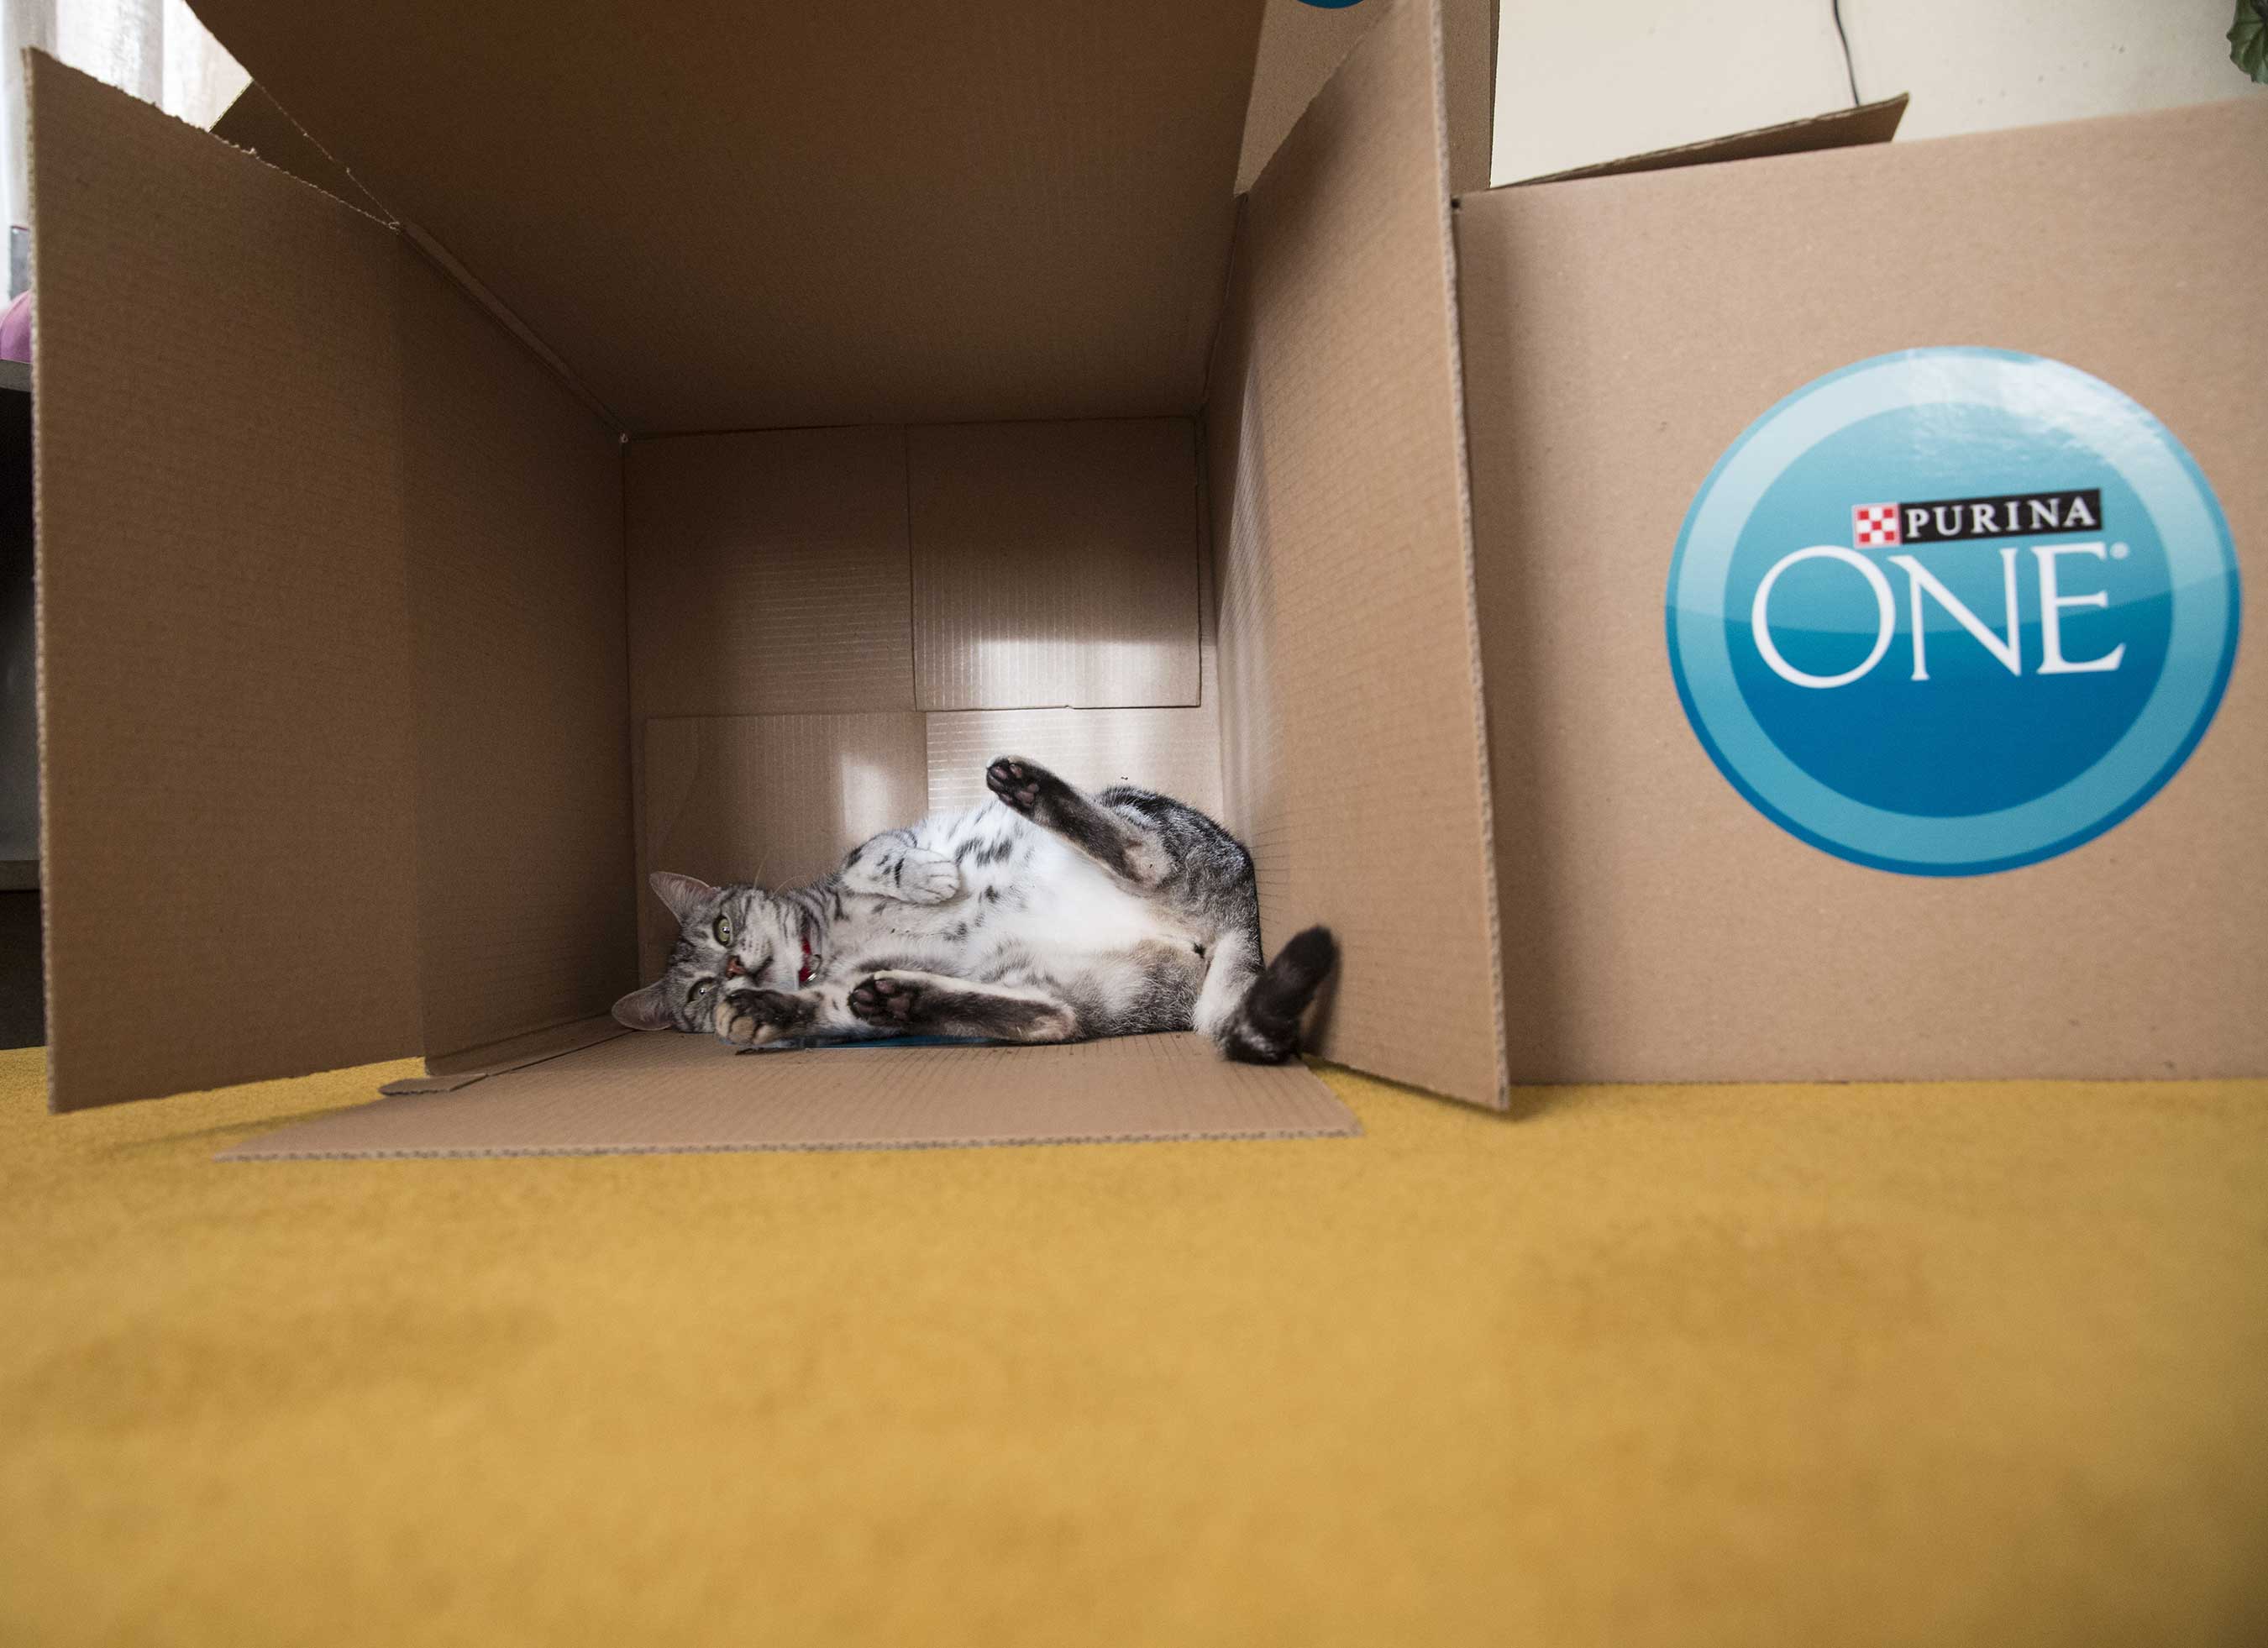 Purina ONE brand cat food has created a hotel experience, The Purina ONE Whole Body Health Hotel, with cat-themed amenities and cat health experts to underscore the importance of lifelong whole body health for cats.